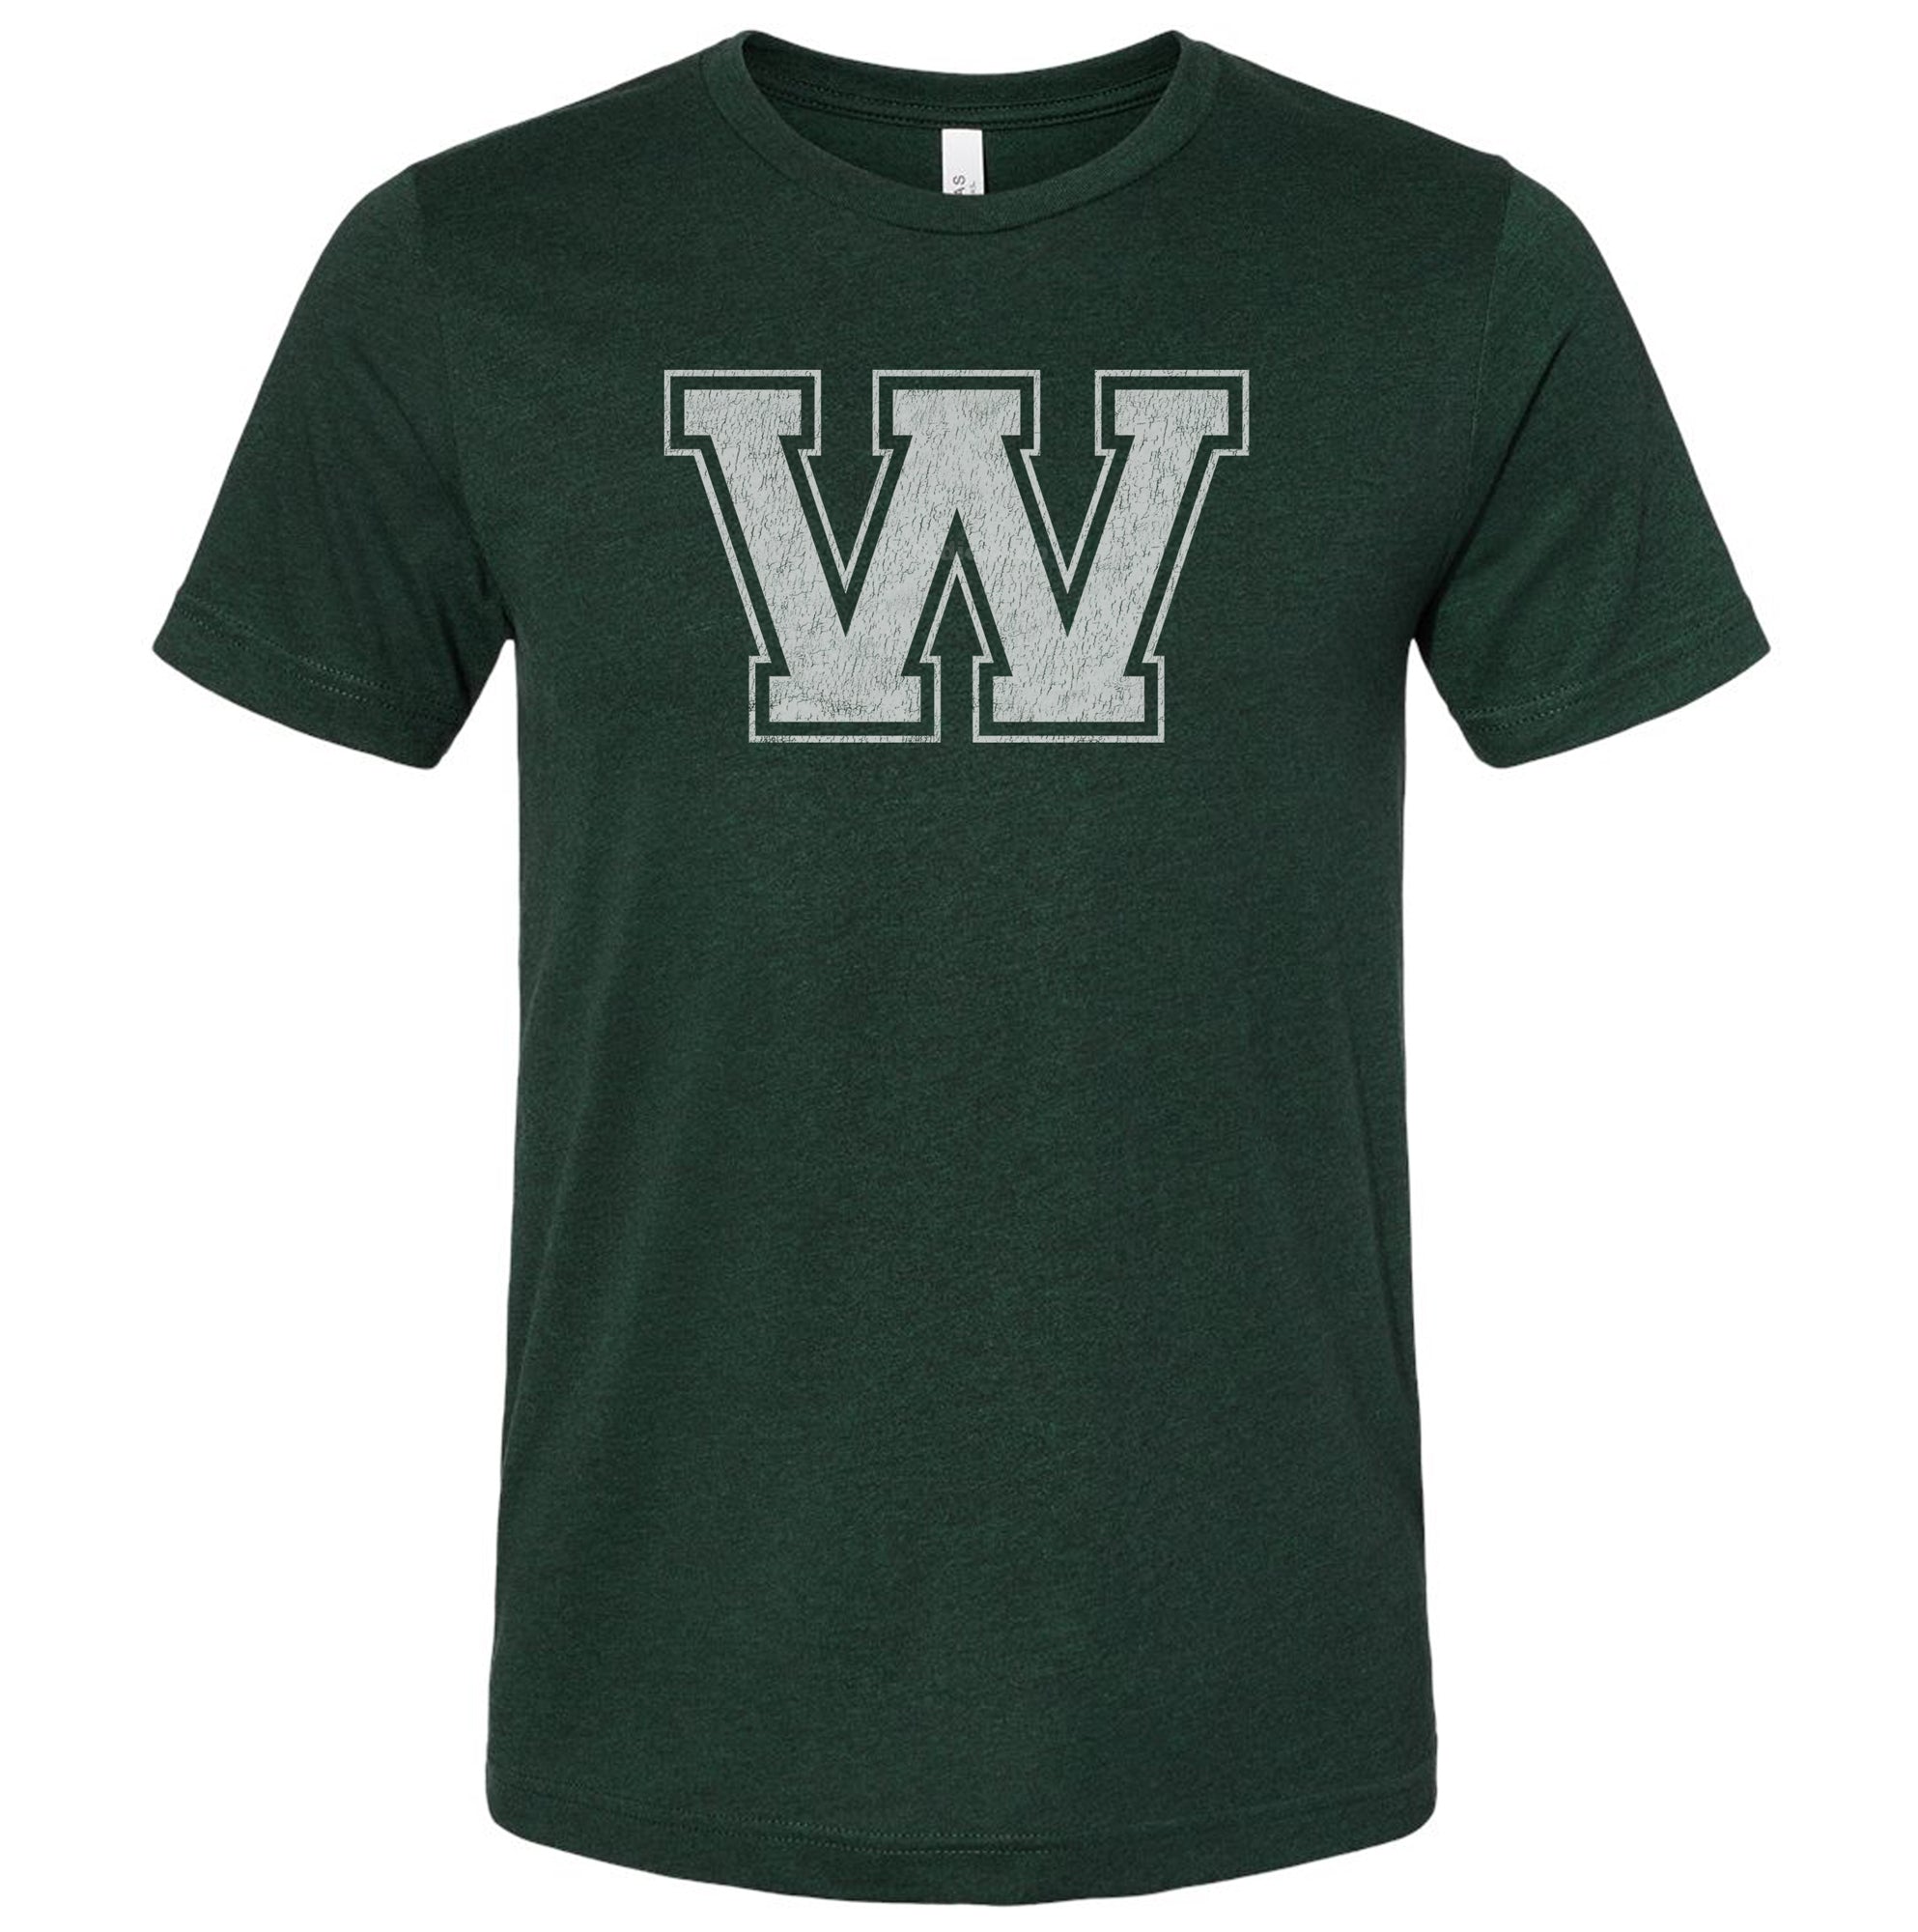 "W" - Vintage - Blended Youth Tee